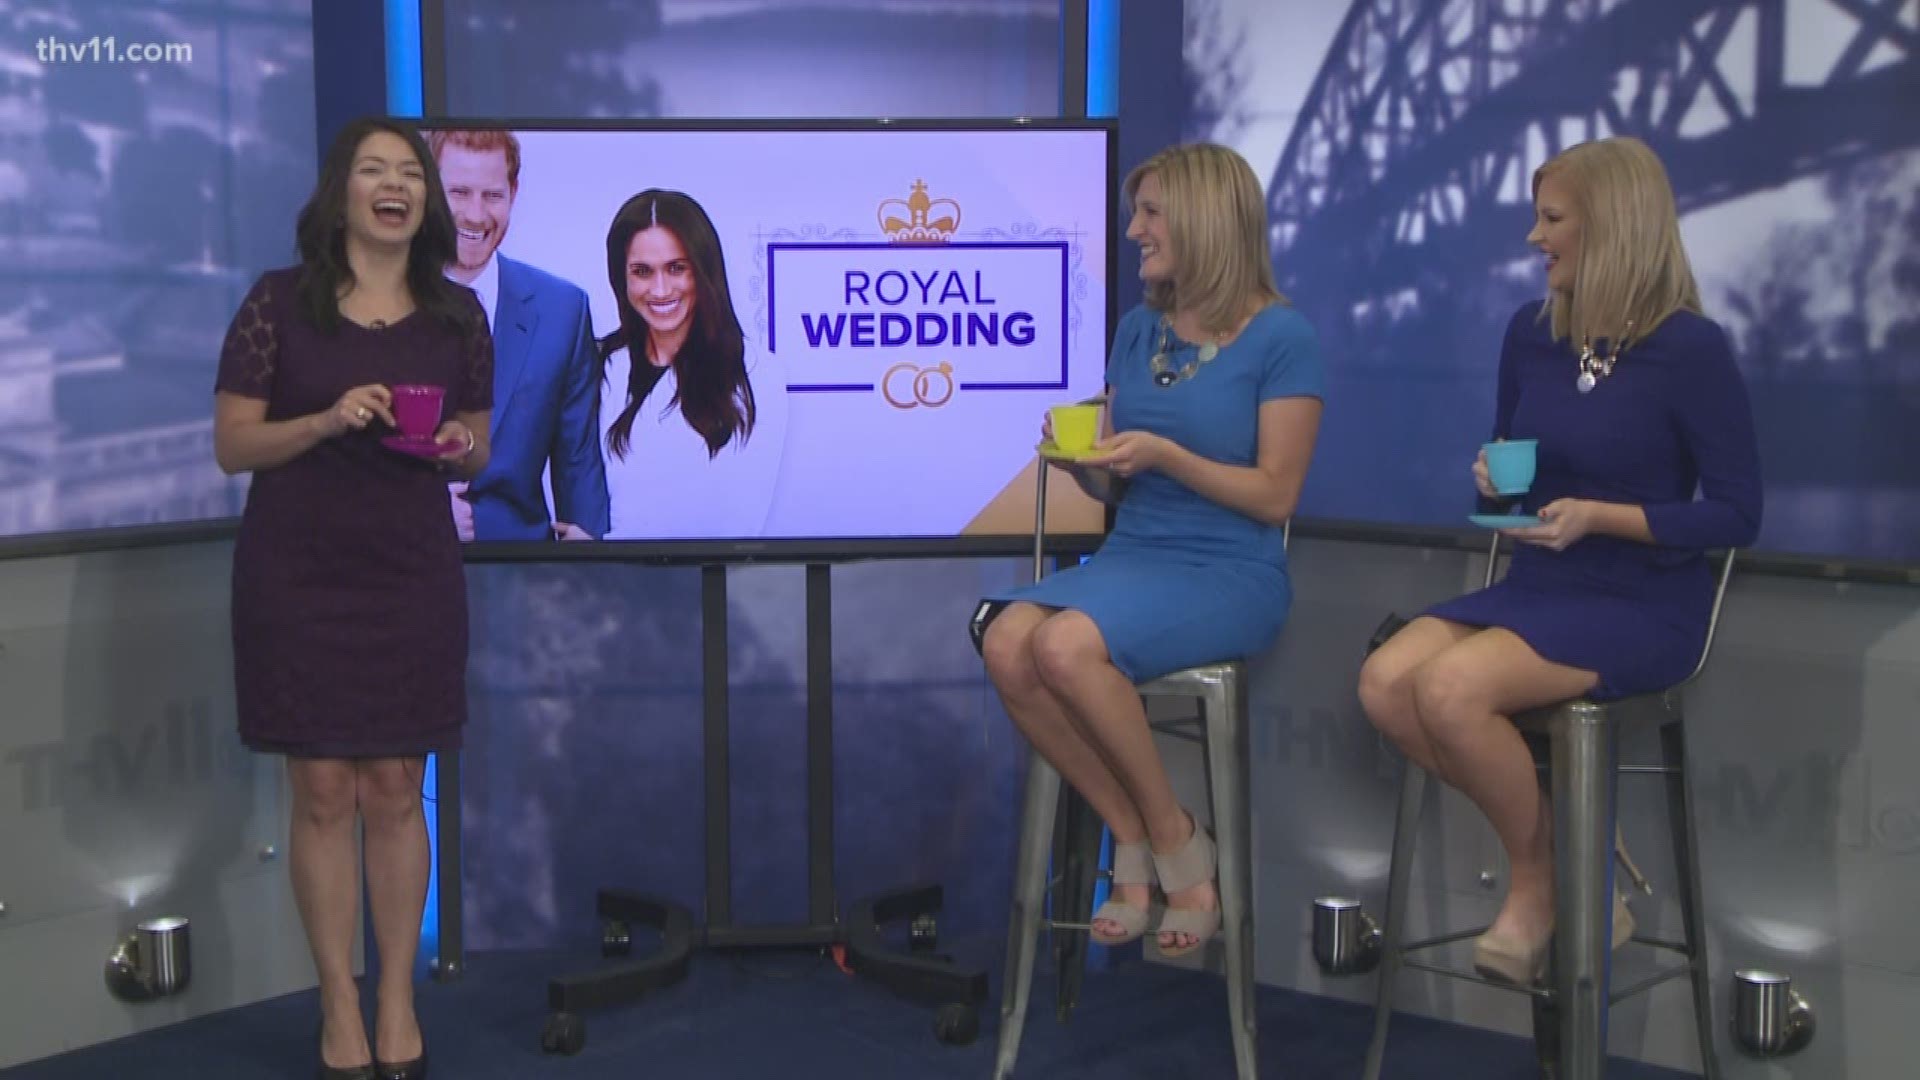 Amanda and Laura get some Royal Wedding etiquette tips